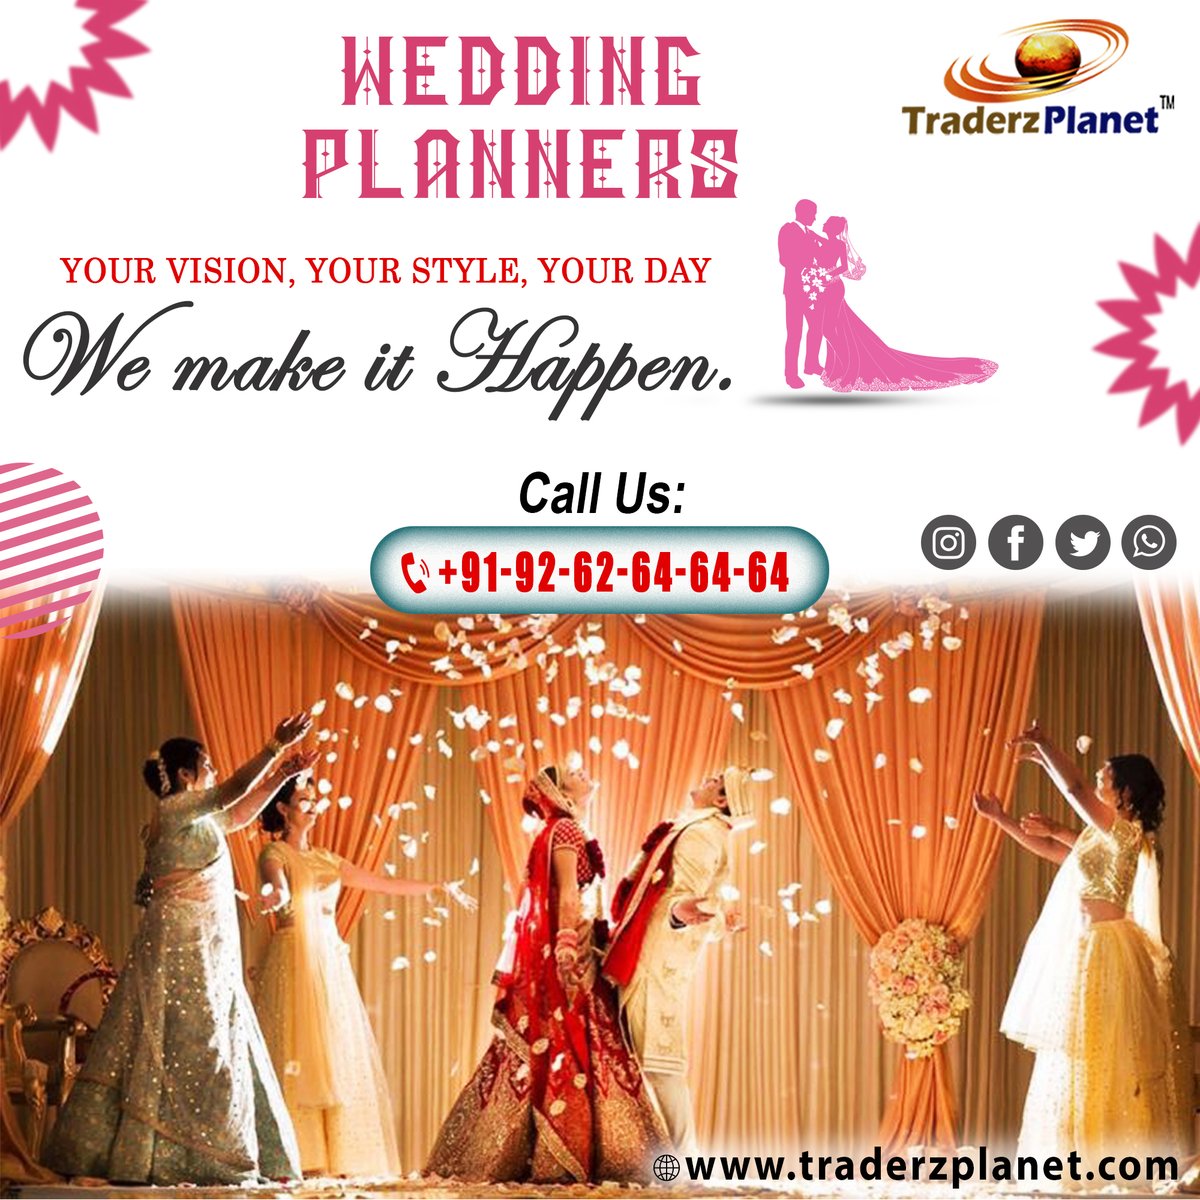 An occasion that makes History.
#weddingplanners #weddingplannerlife #weddingplannerjakarta #weddingplannermalaysia #weddingplannerbandung #weddingplannervenezuela #weddingplannerbali #weddingplannerkl
Anything Anytime Anywhere You Want-Only One Call 92-62-64-64-64